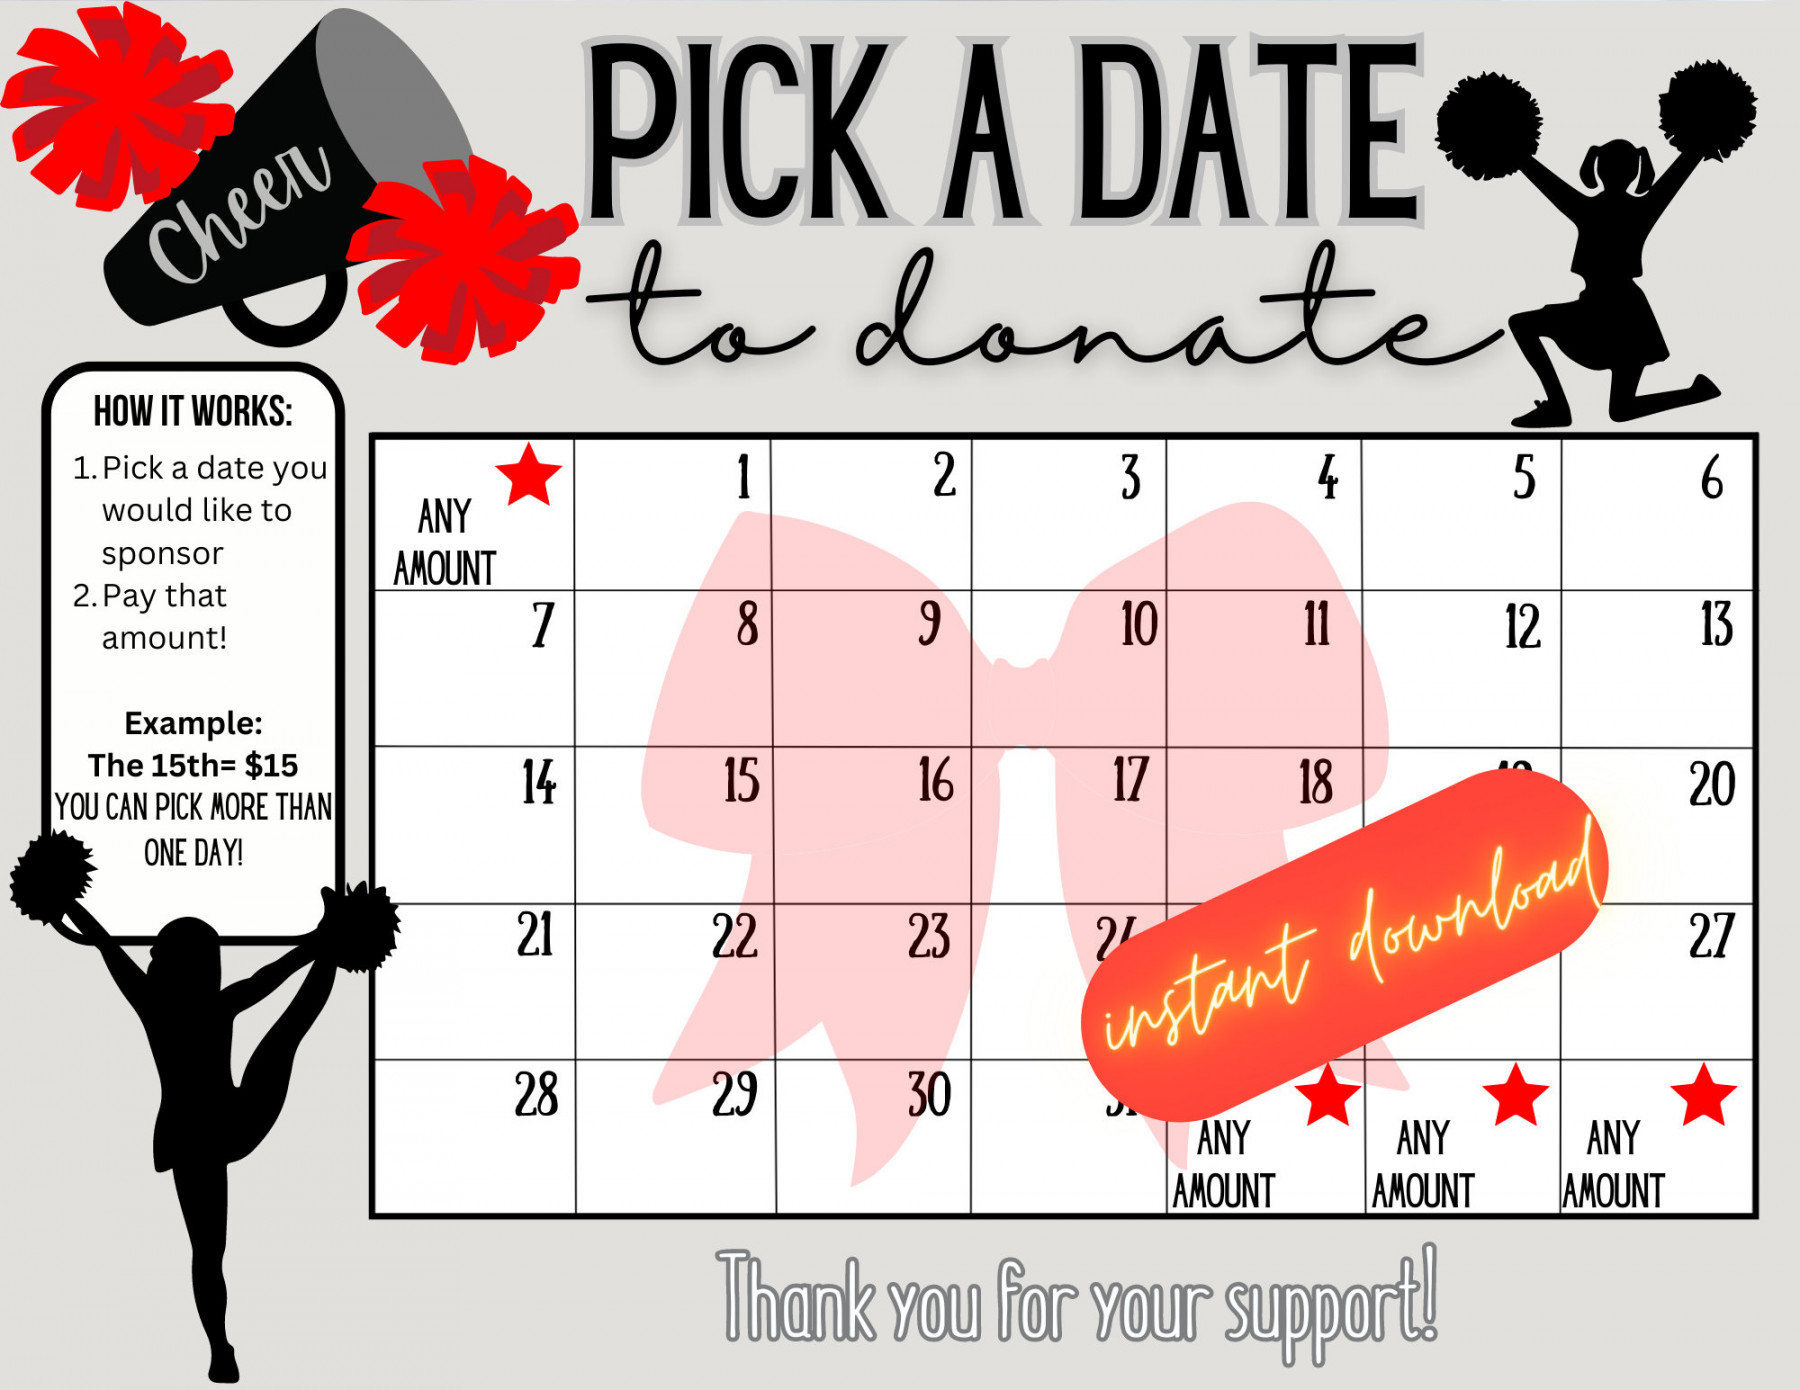 Cheer Red Pick a Date to Donate, Fundraiser Calendar, Pay the Date